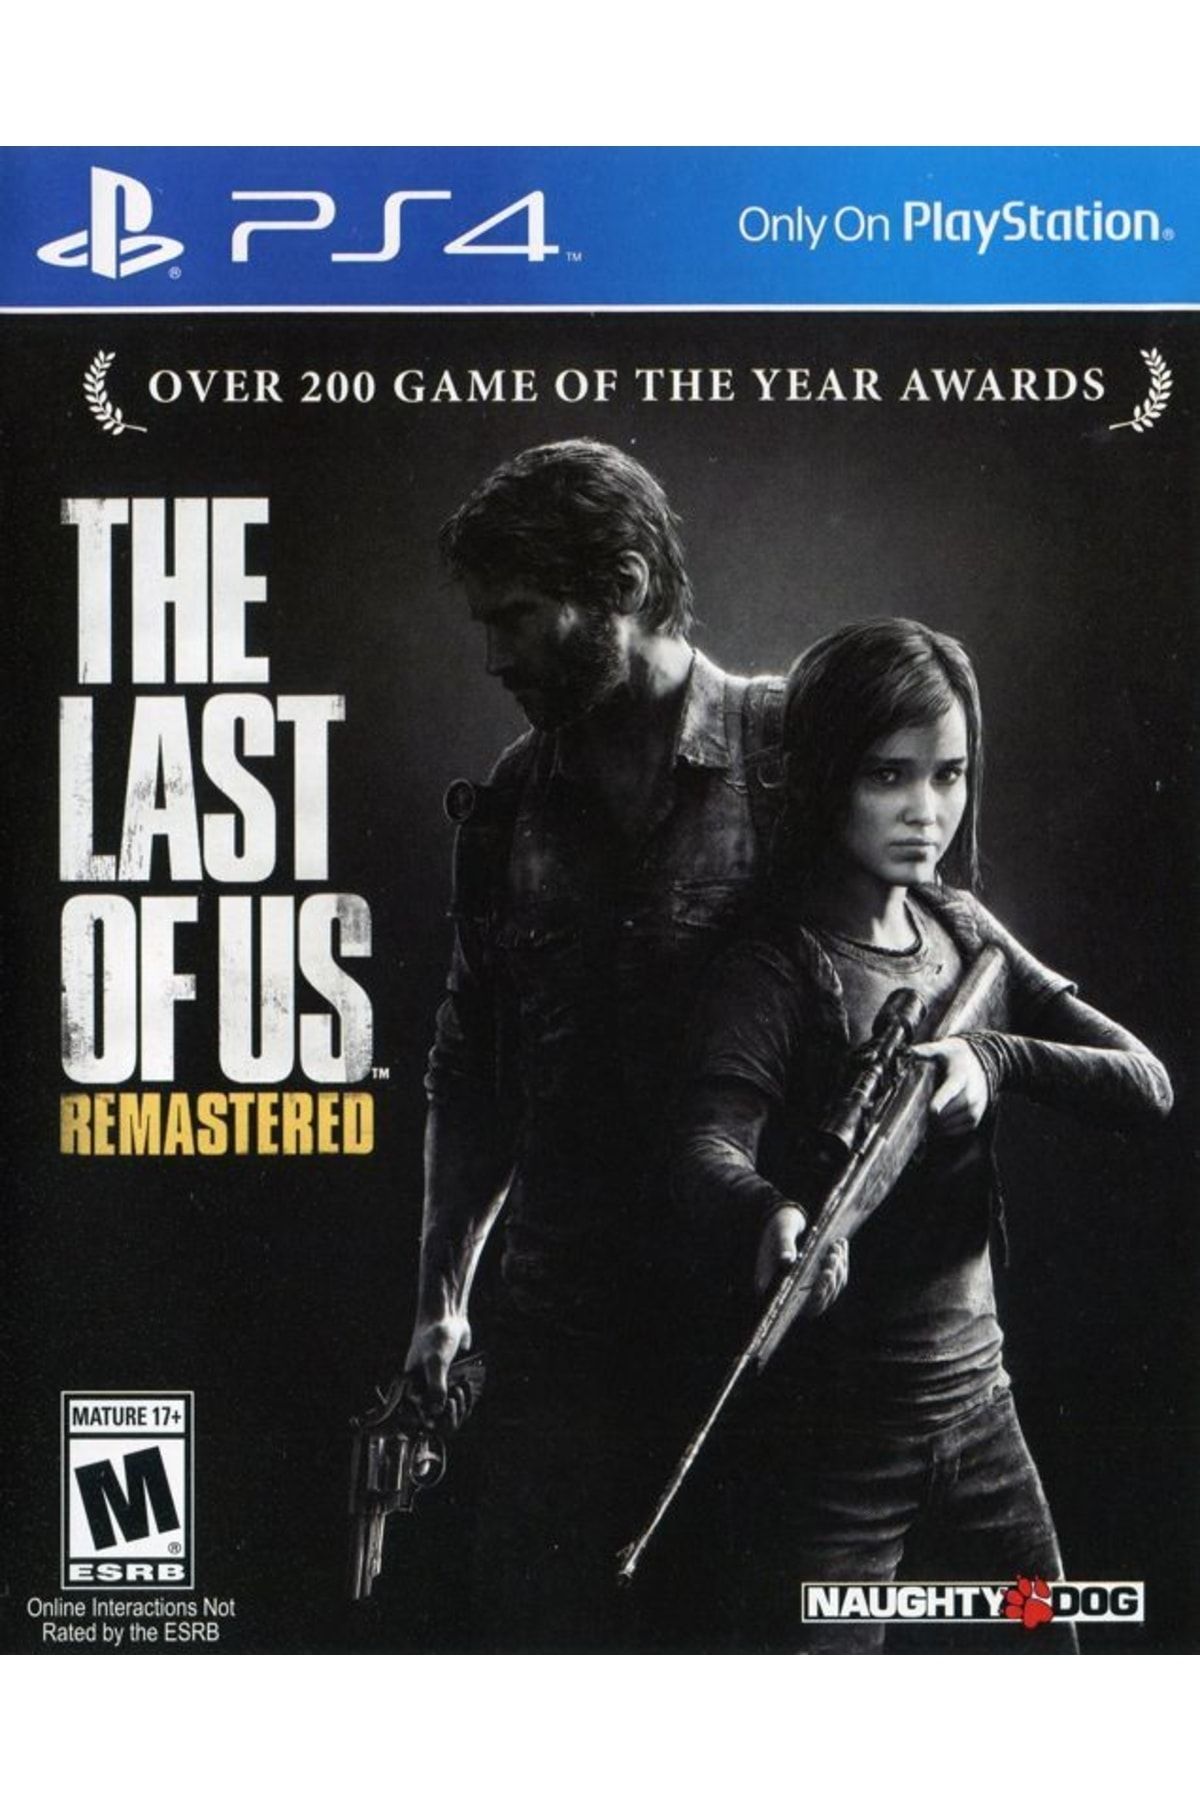 Naughty Dog The Last Of Us Remastered Playstation 4 Oyun Ps4 Oyun